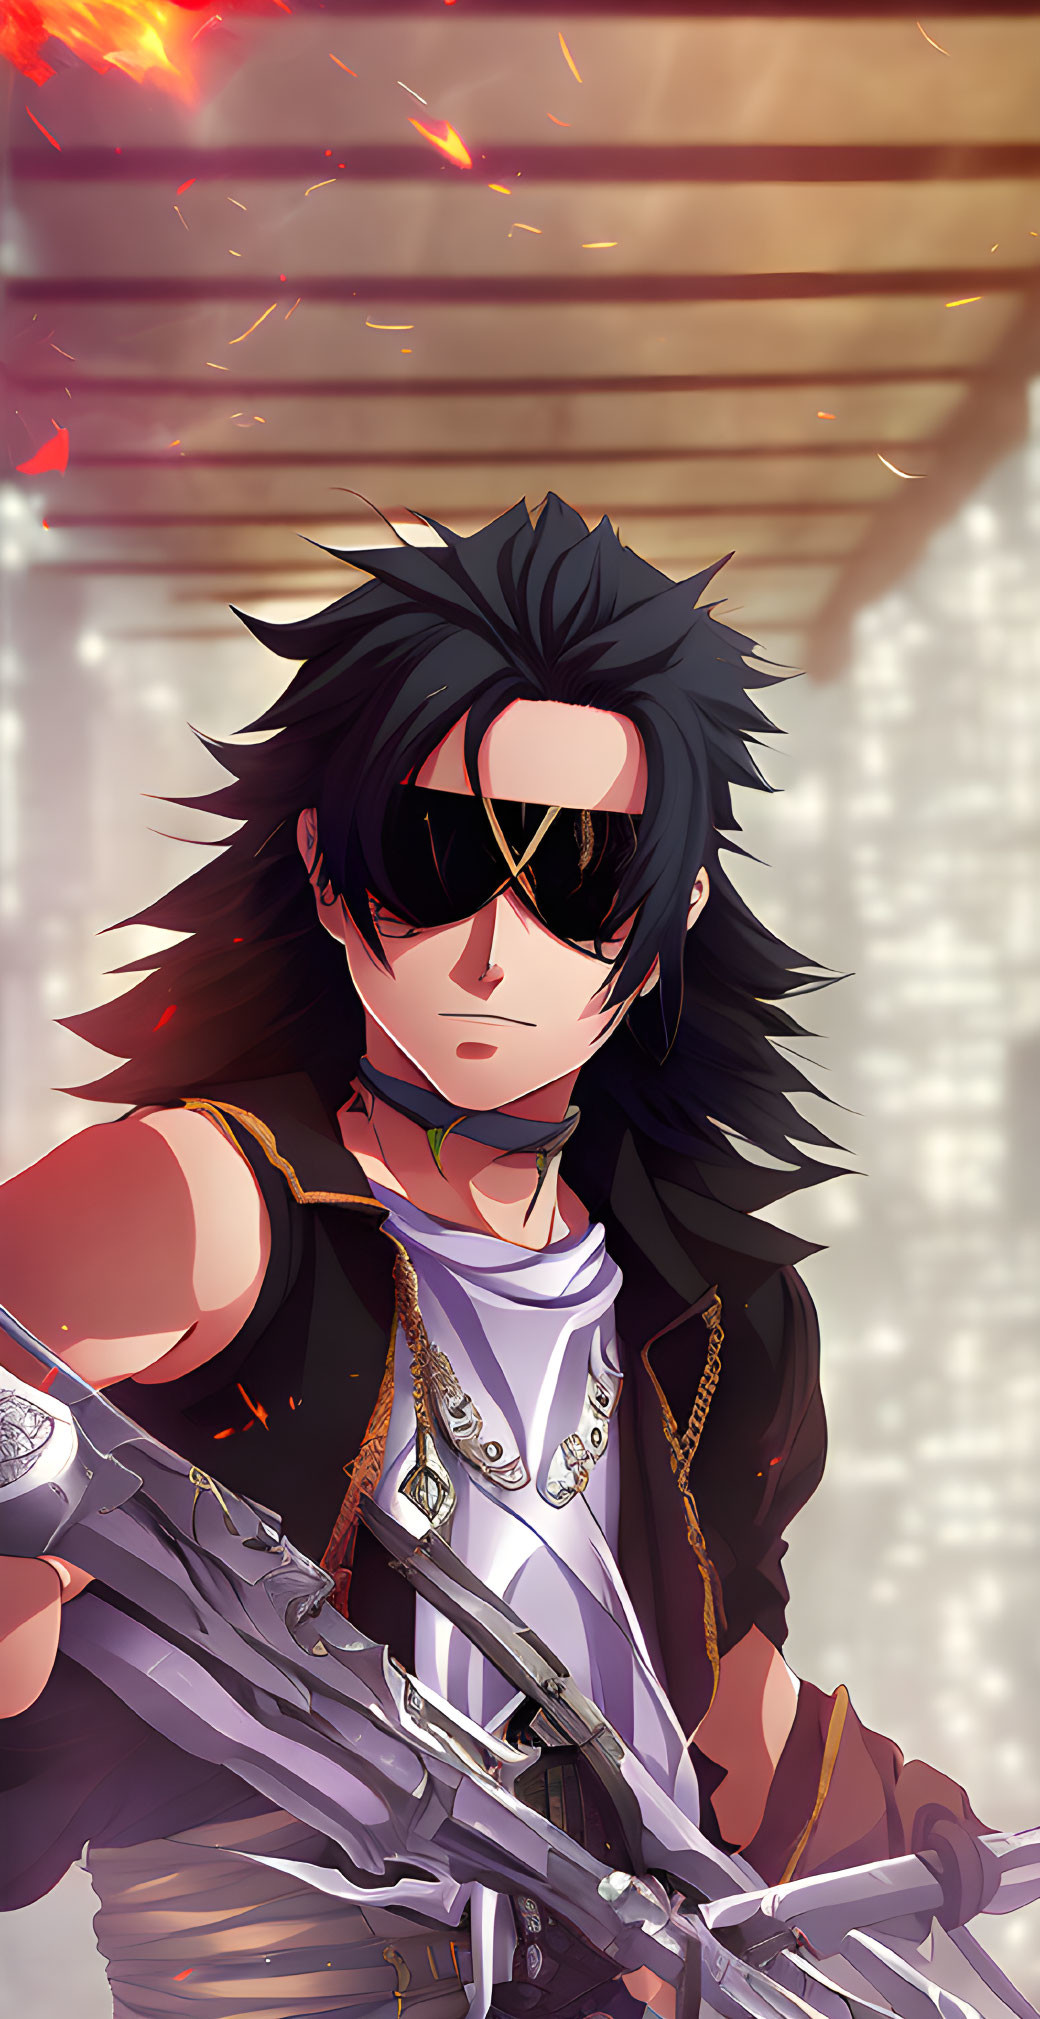 Anime-style male character with black hair and eye-patch holding a mechanical weapon against fiery backdrop